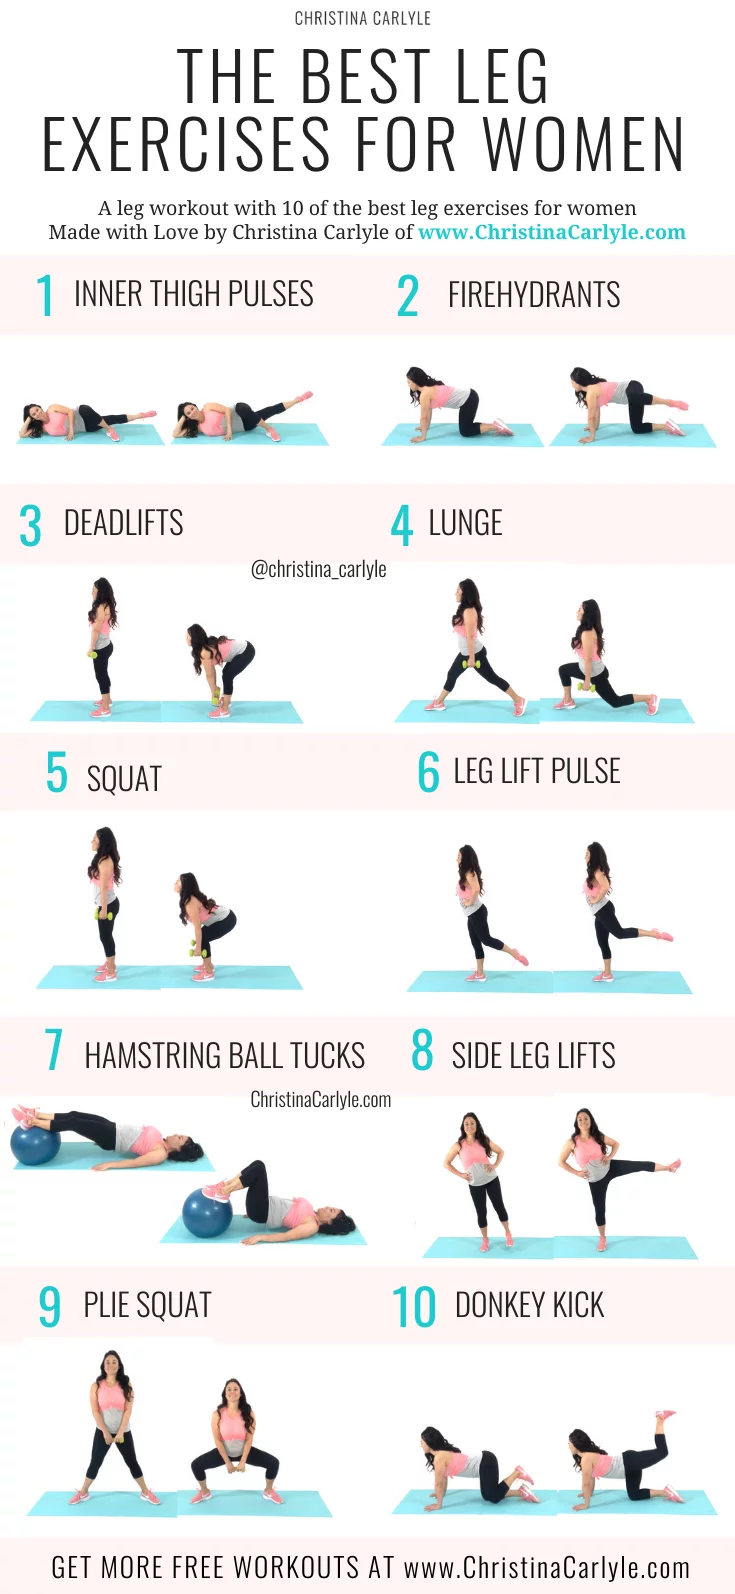 The 10 Best Leg Exercises for Women | Christina Carlyle